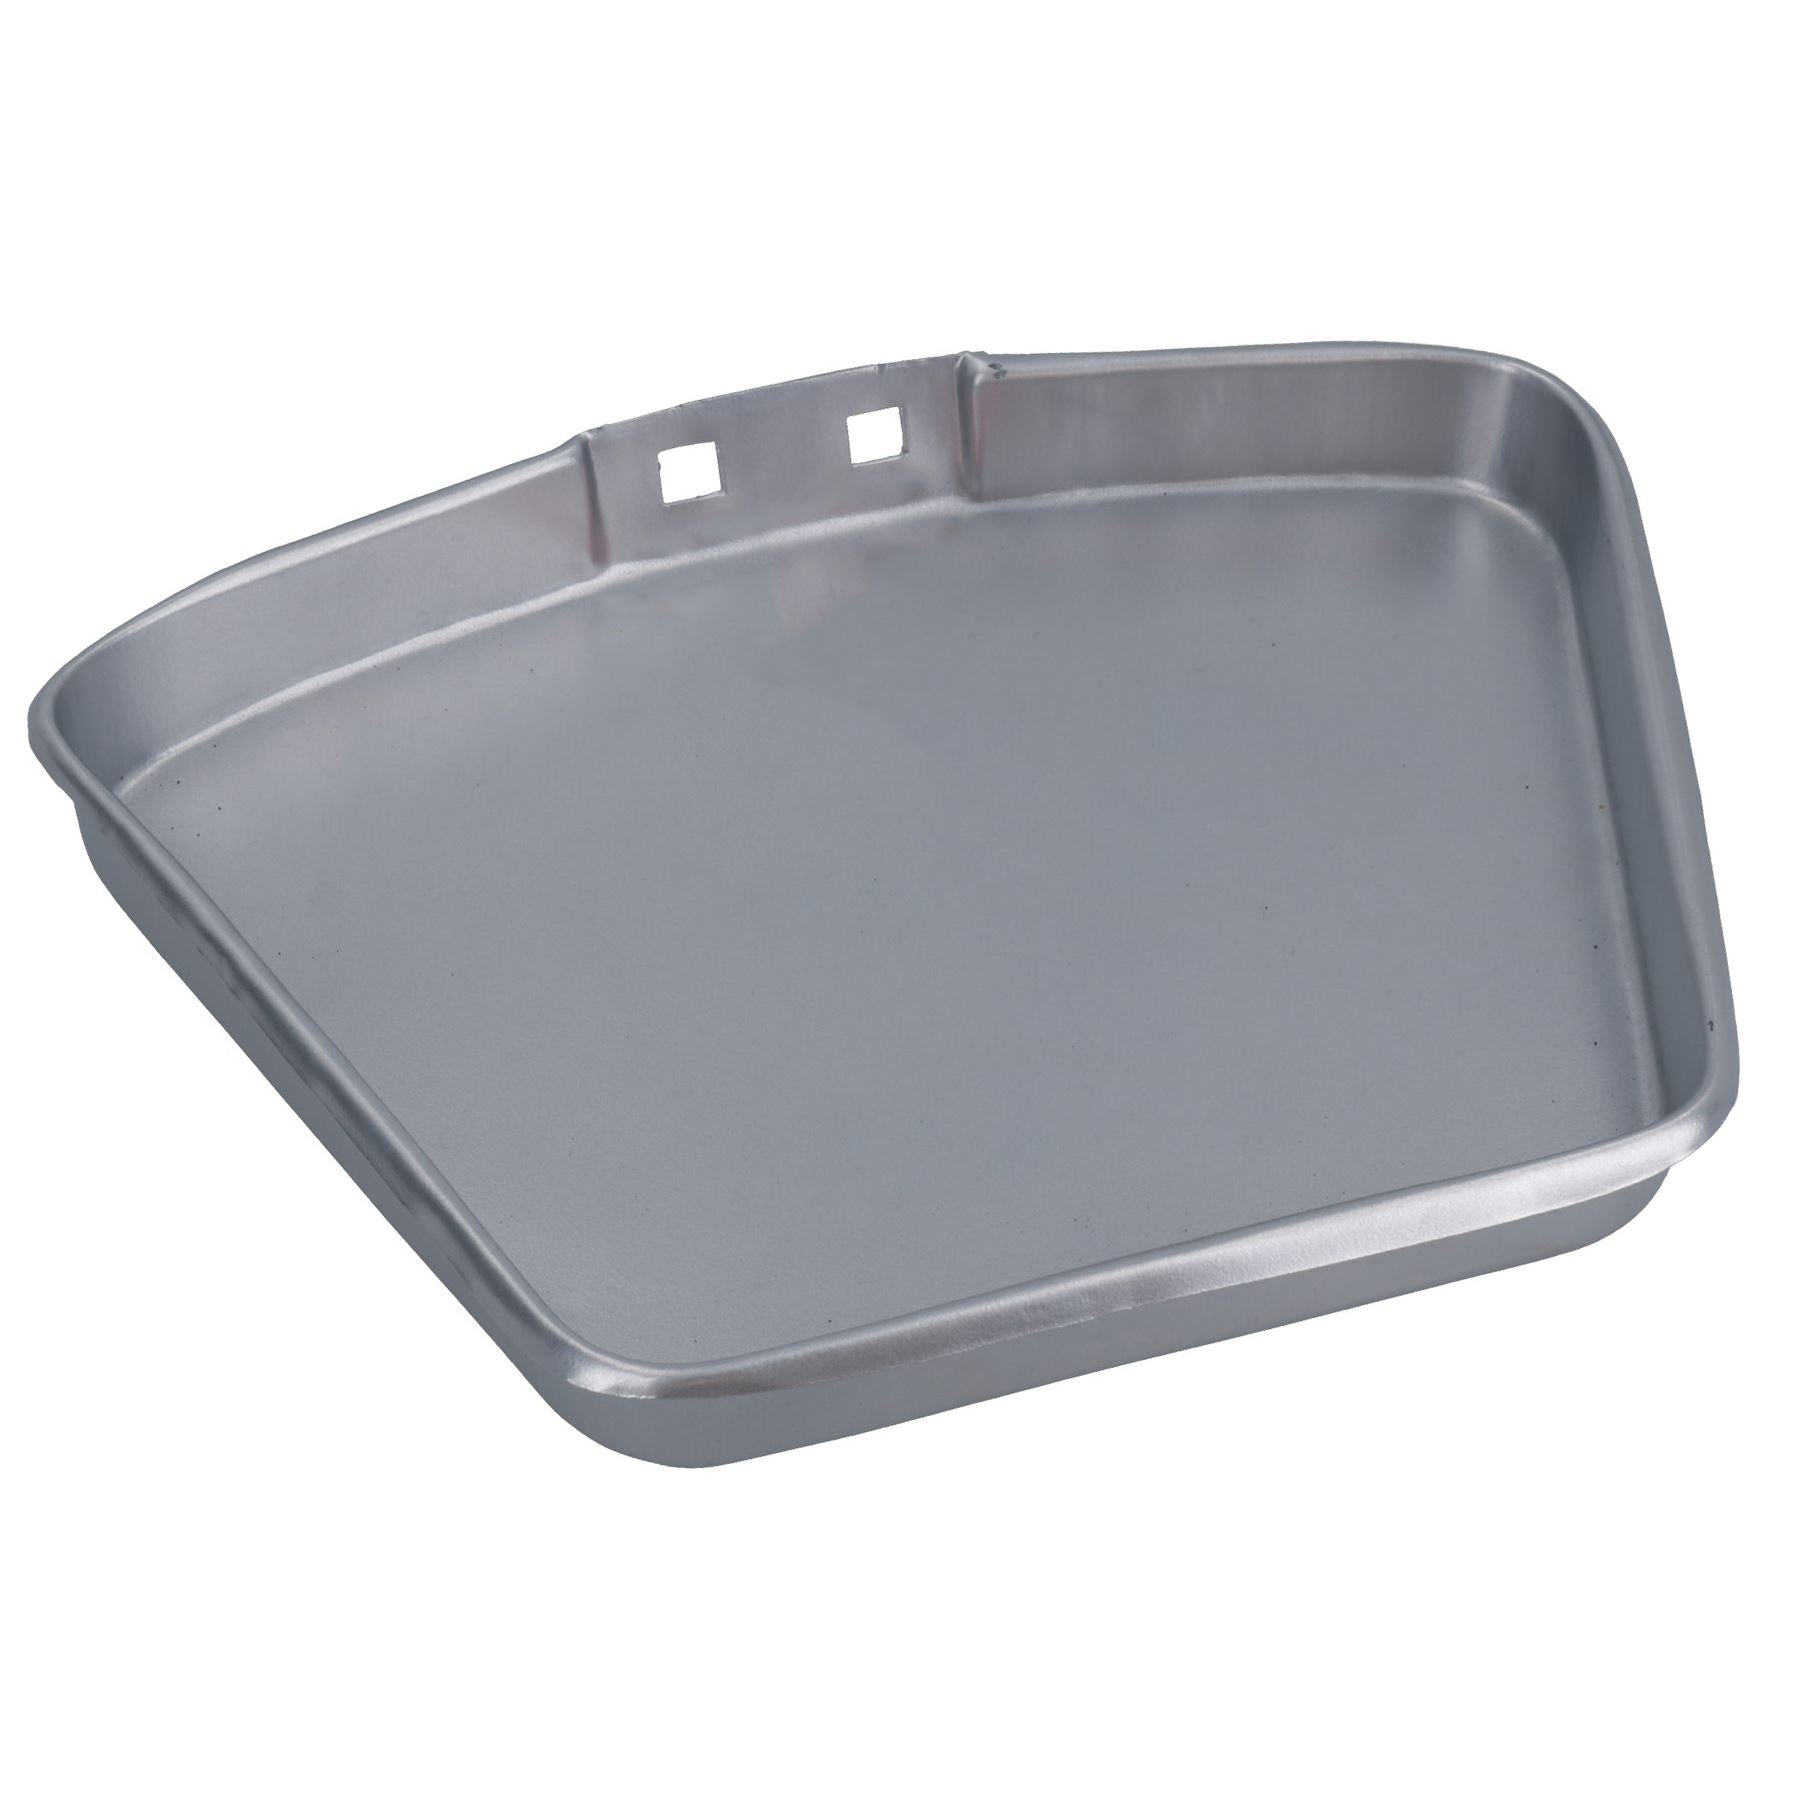 Galvanised 11" Metal Ashpan Ash Pan Tray For 16" Fireplace Open Fire Carrier